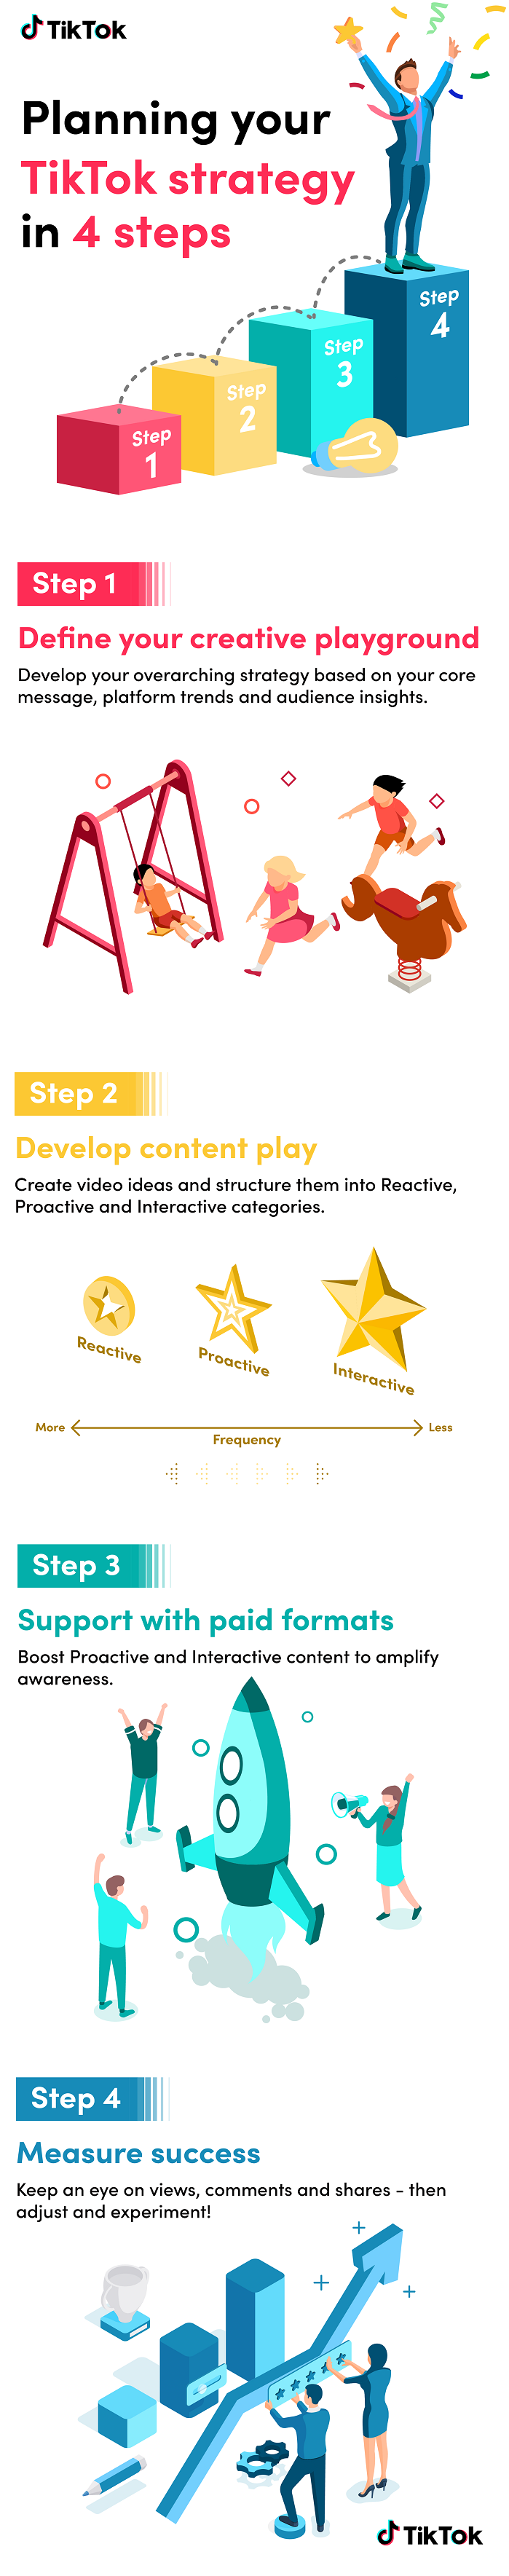 planning your tiktok strategy in 4 steps infographic